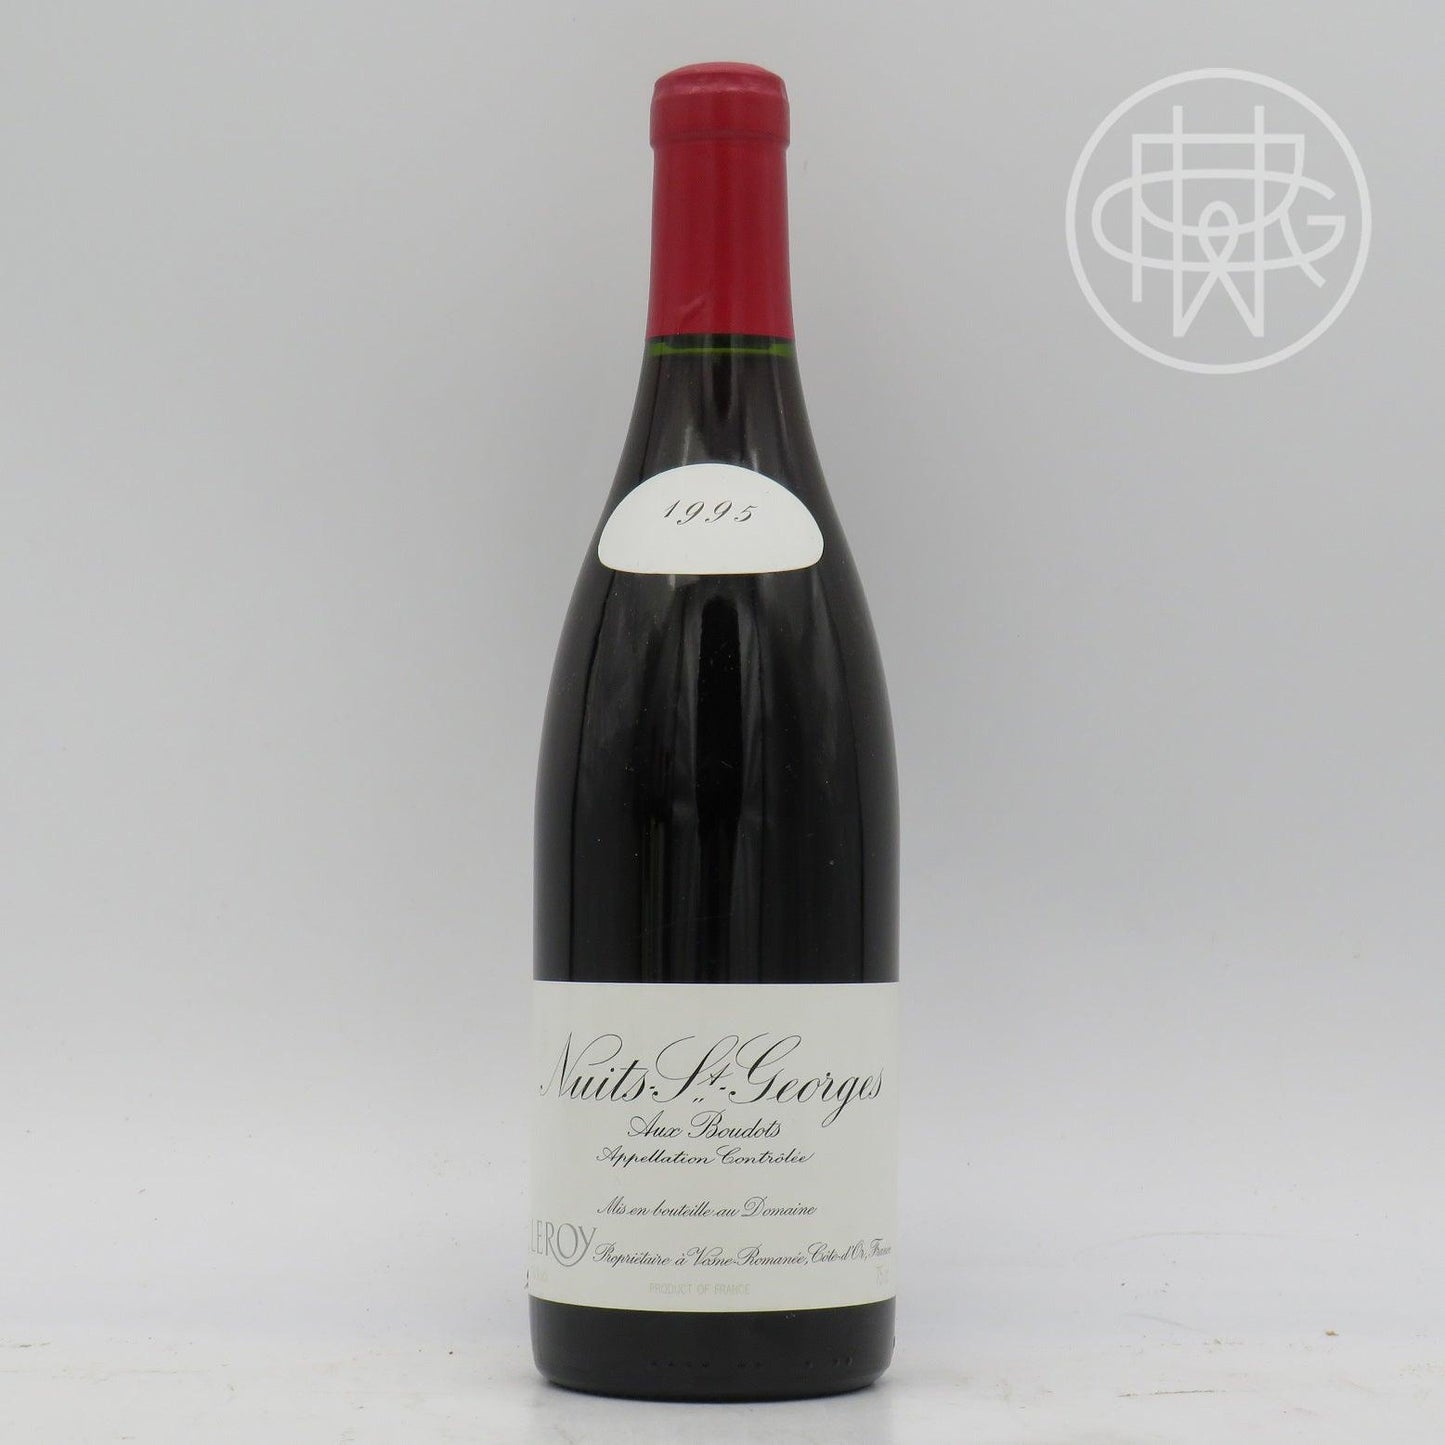 Leroy Nuits St. Georges Les Boudots 1995 750mL - GRW Wine Collection